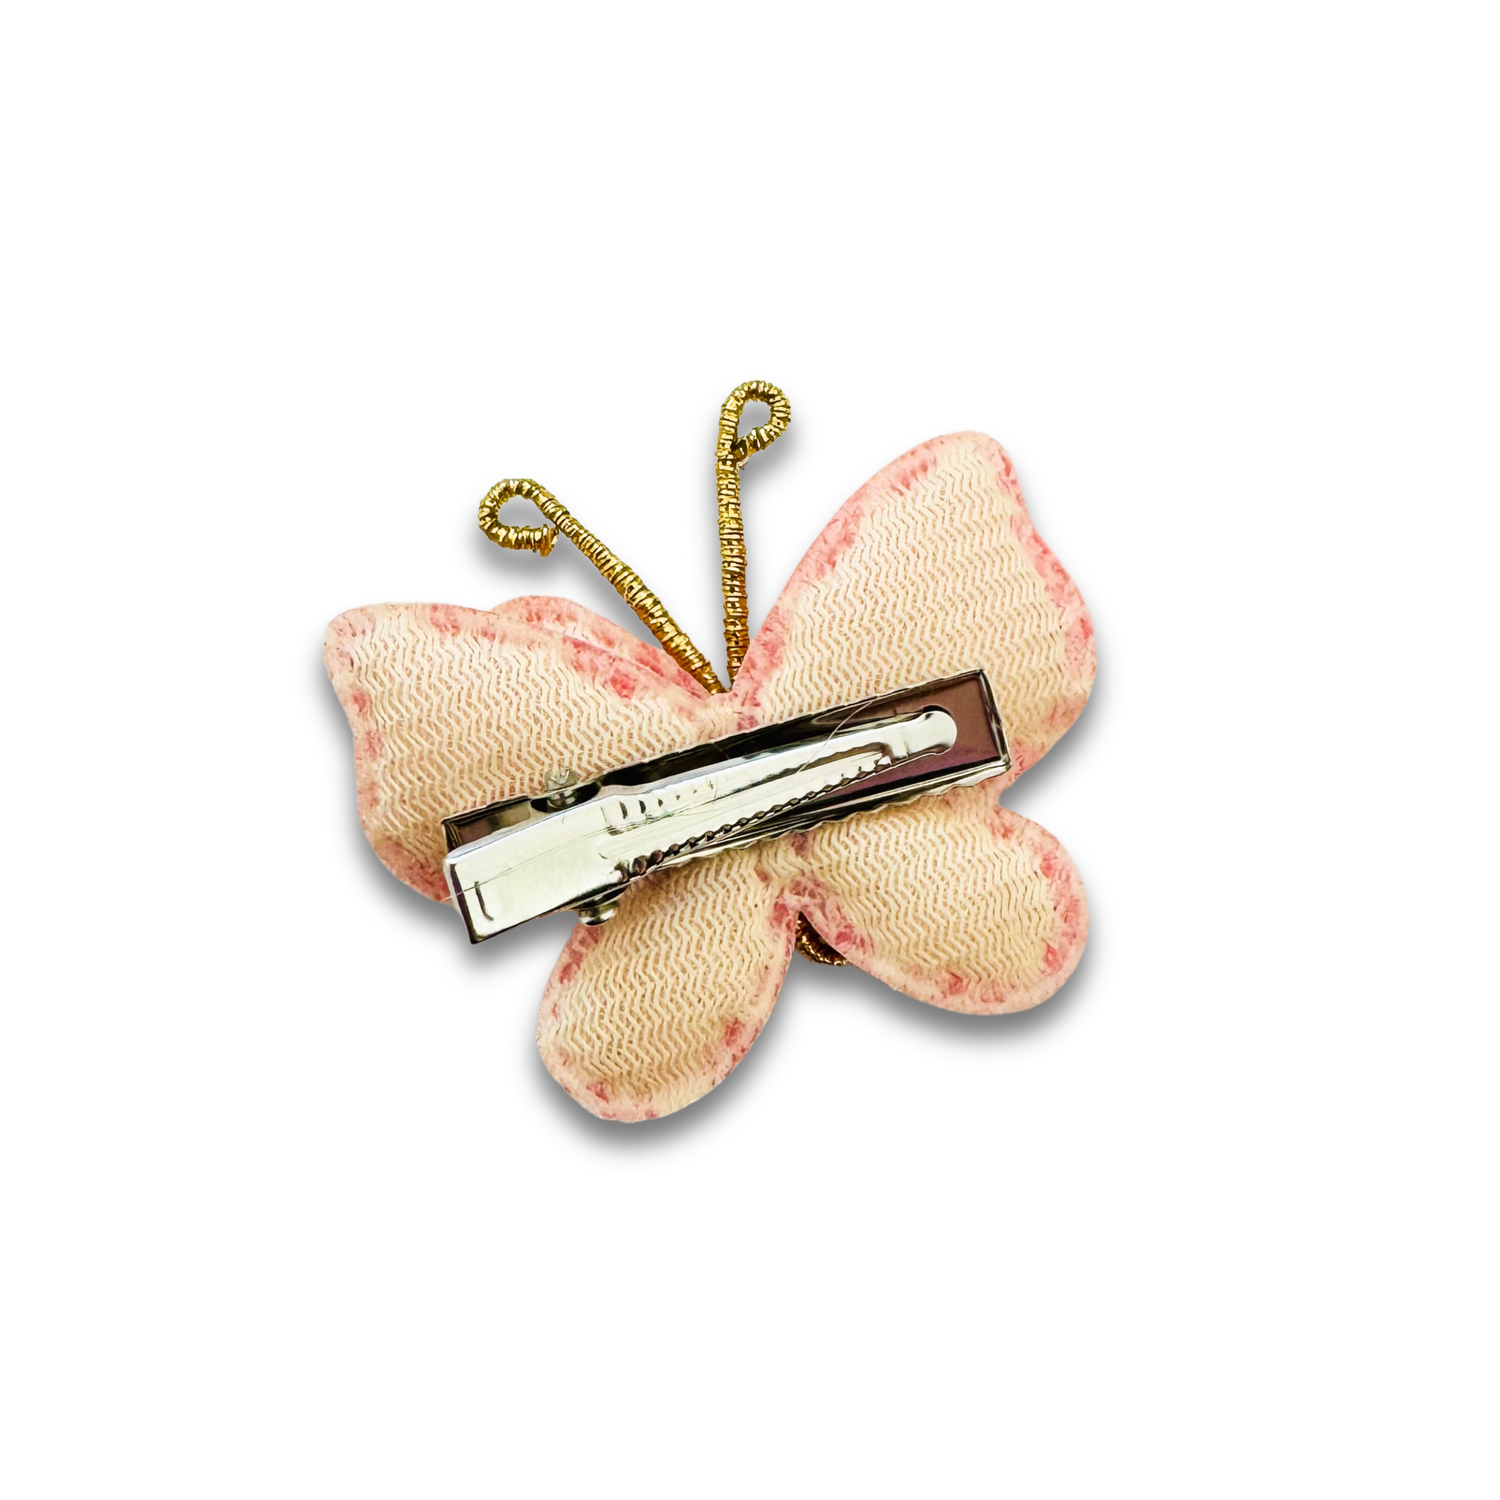 Pink Butterfly Clip  Sewing Sweethearts   